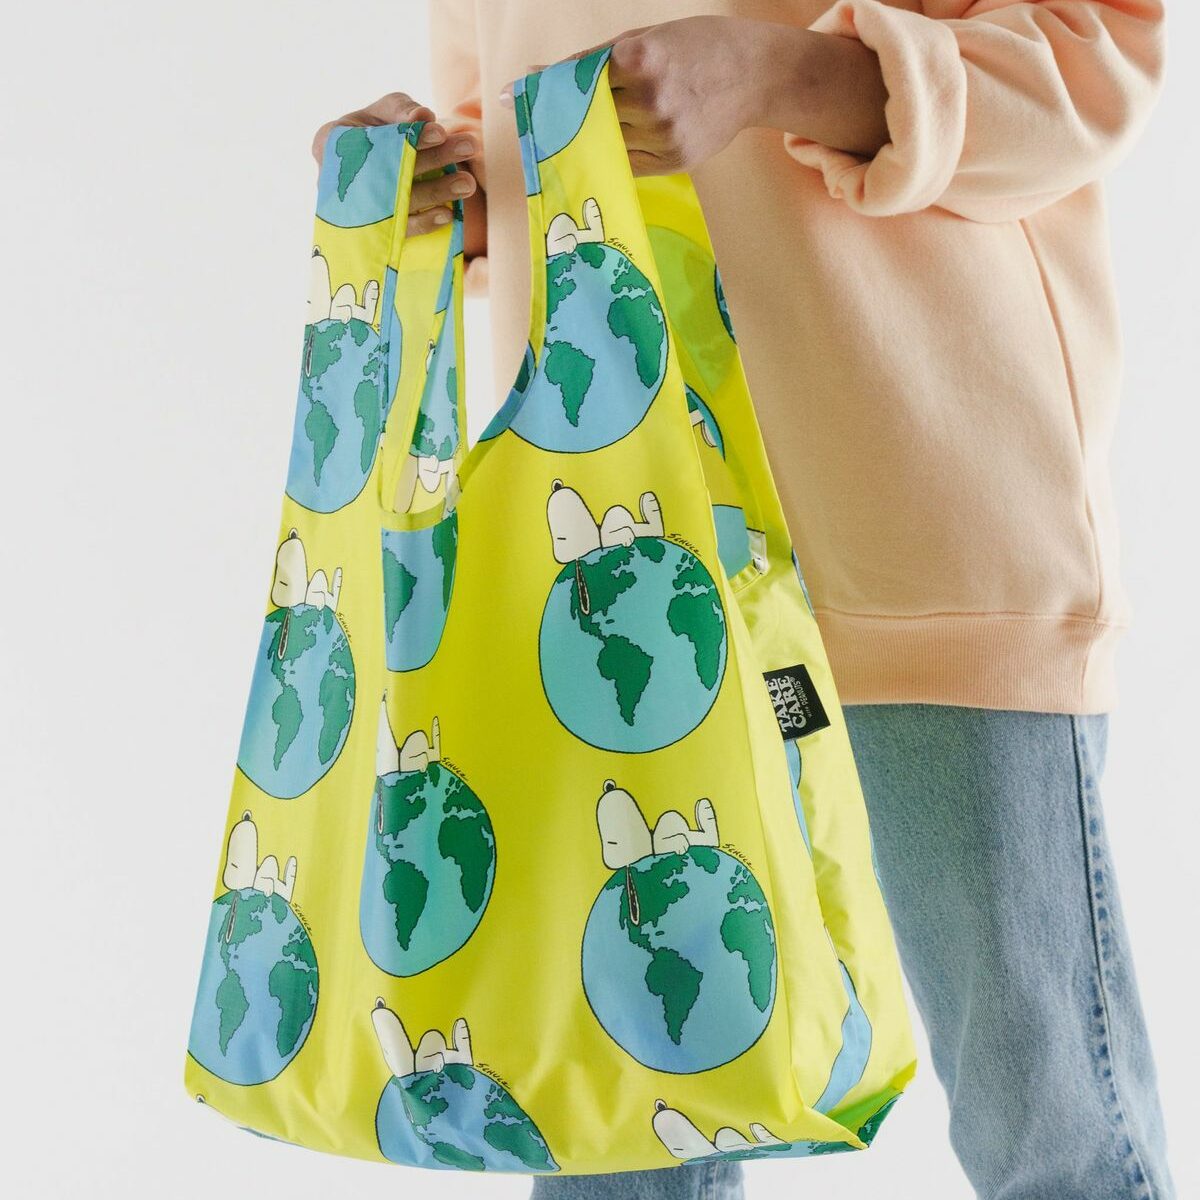 Baggu reusable grocery bags | Juniperus inclusive, sustainable gift guide 2021